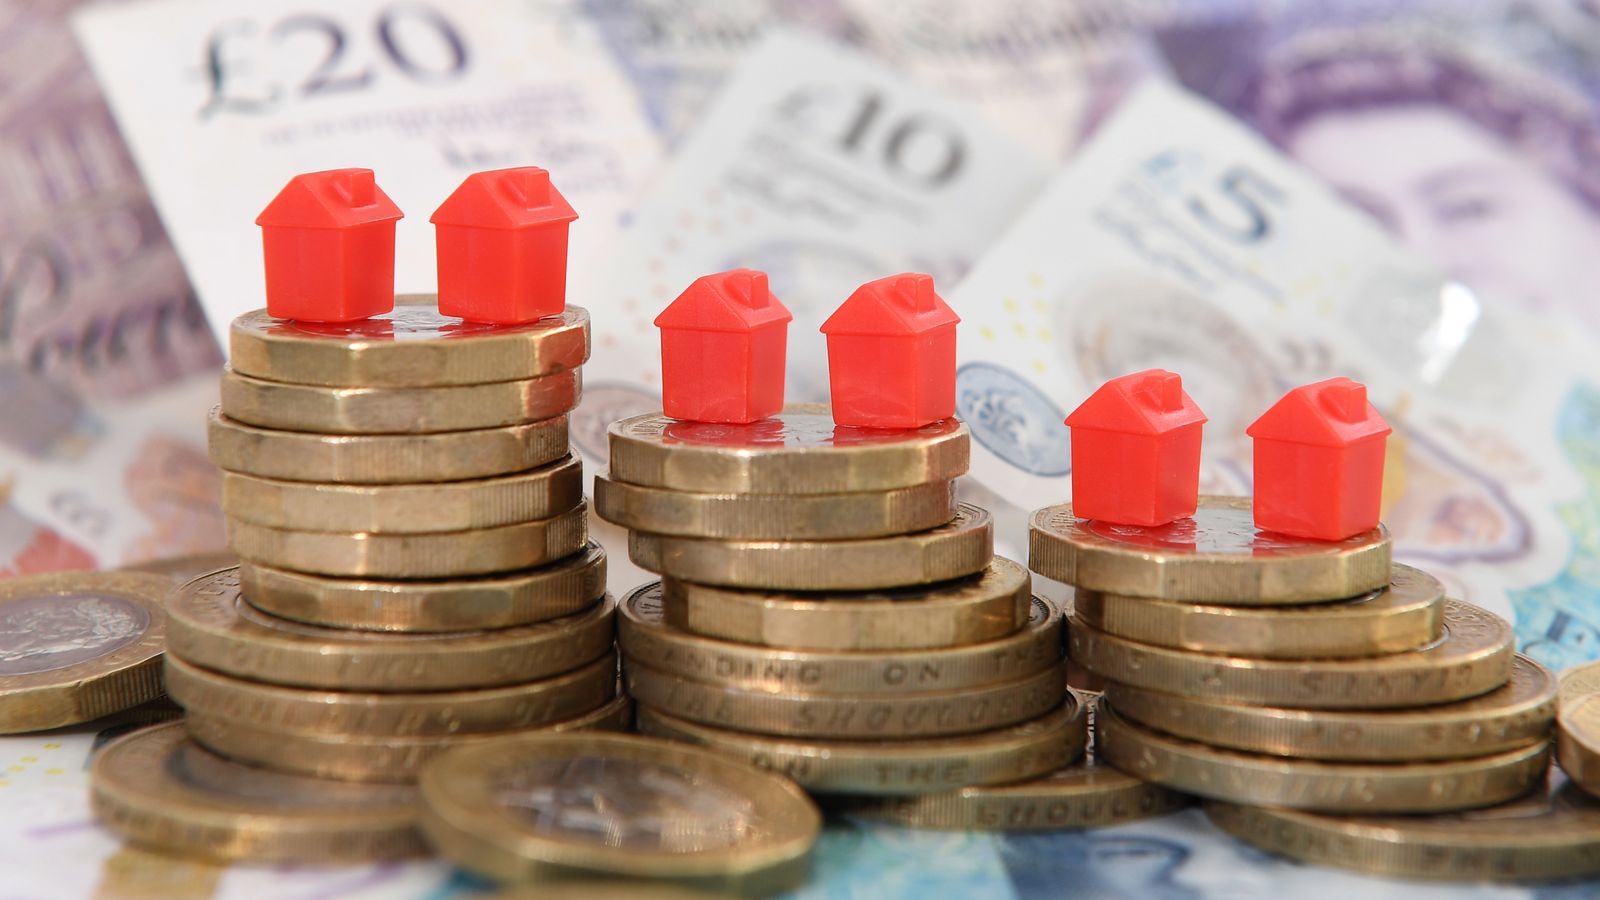 Labour wants 25-year, fixed-rate mortgages to become common in the UK. Is that realistic?